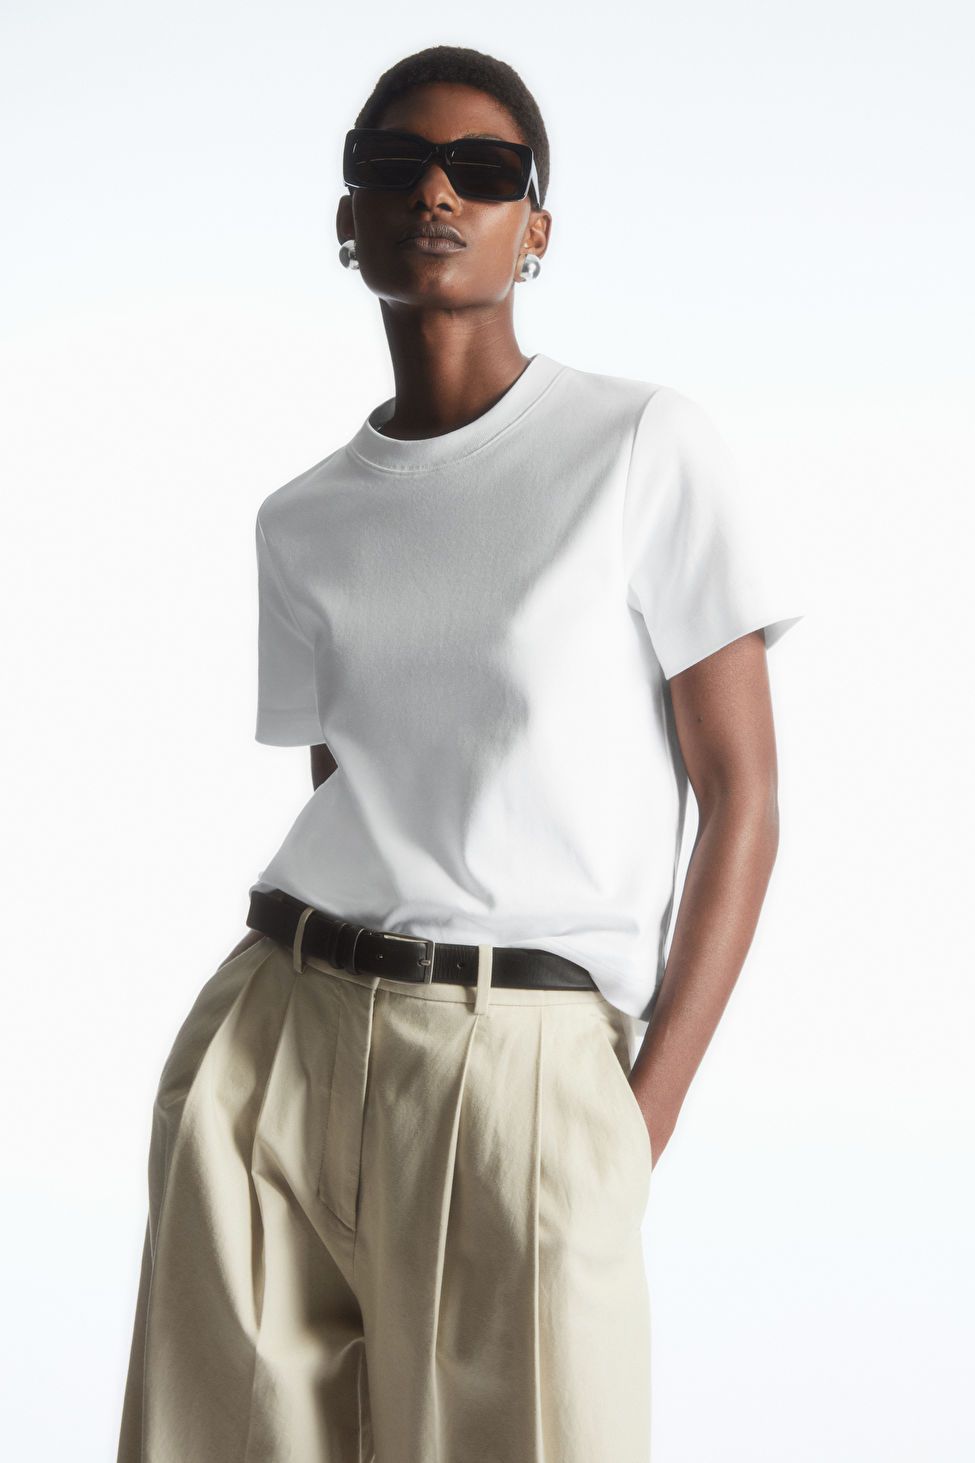 THE CLEAN CUT T-SHIRT - White - COS | COS UK